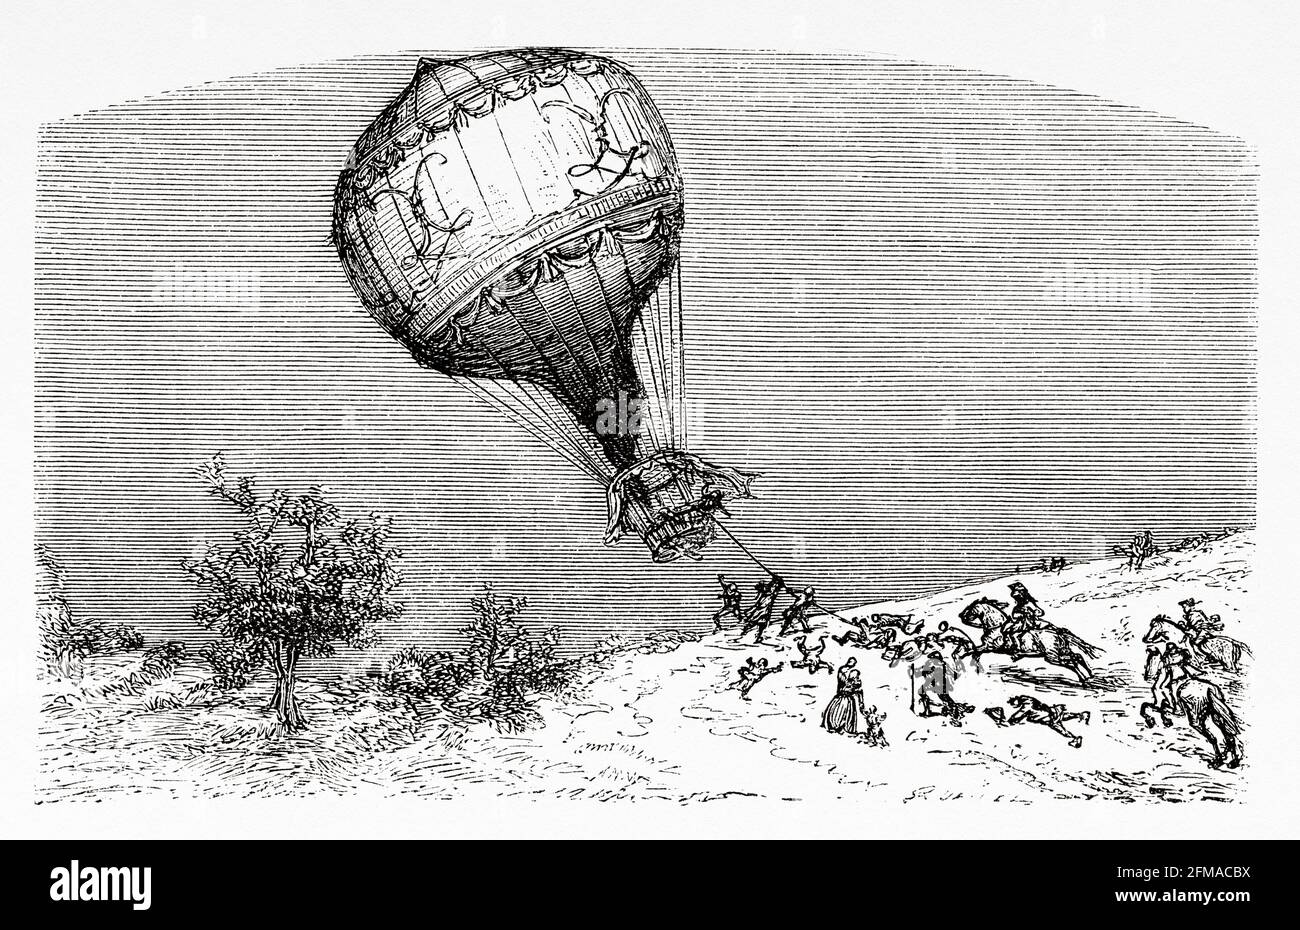 Battle of Fleurus June 26, 1794. French Revolutionary Wars. French defeat of the Austrians, and their allies. The first use of a hot air balloon for aerial observation during a battle. France. Old 19th century engraved illustration from Histoire de la Revolution Francaise 1876 by Jules Michelet (1798-1874) Stock Photo